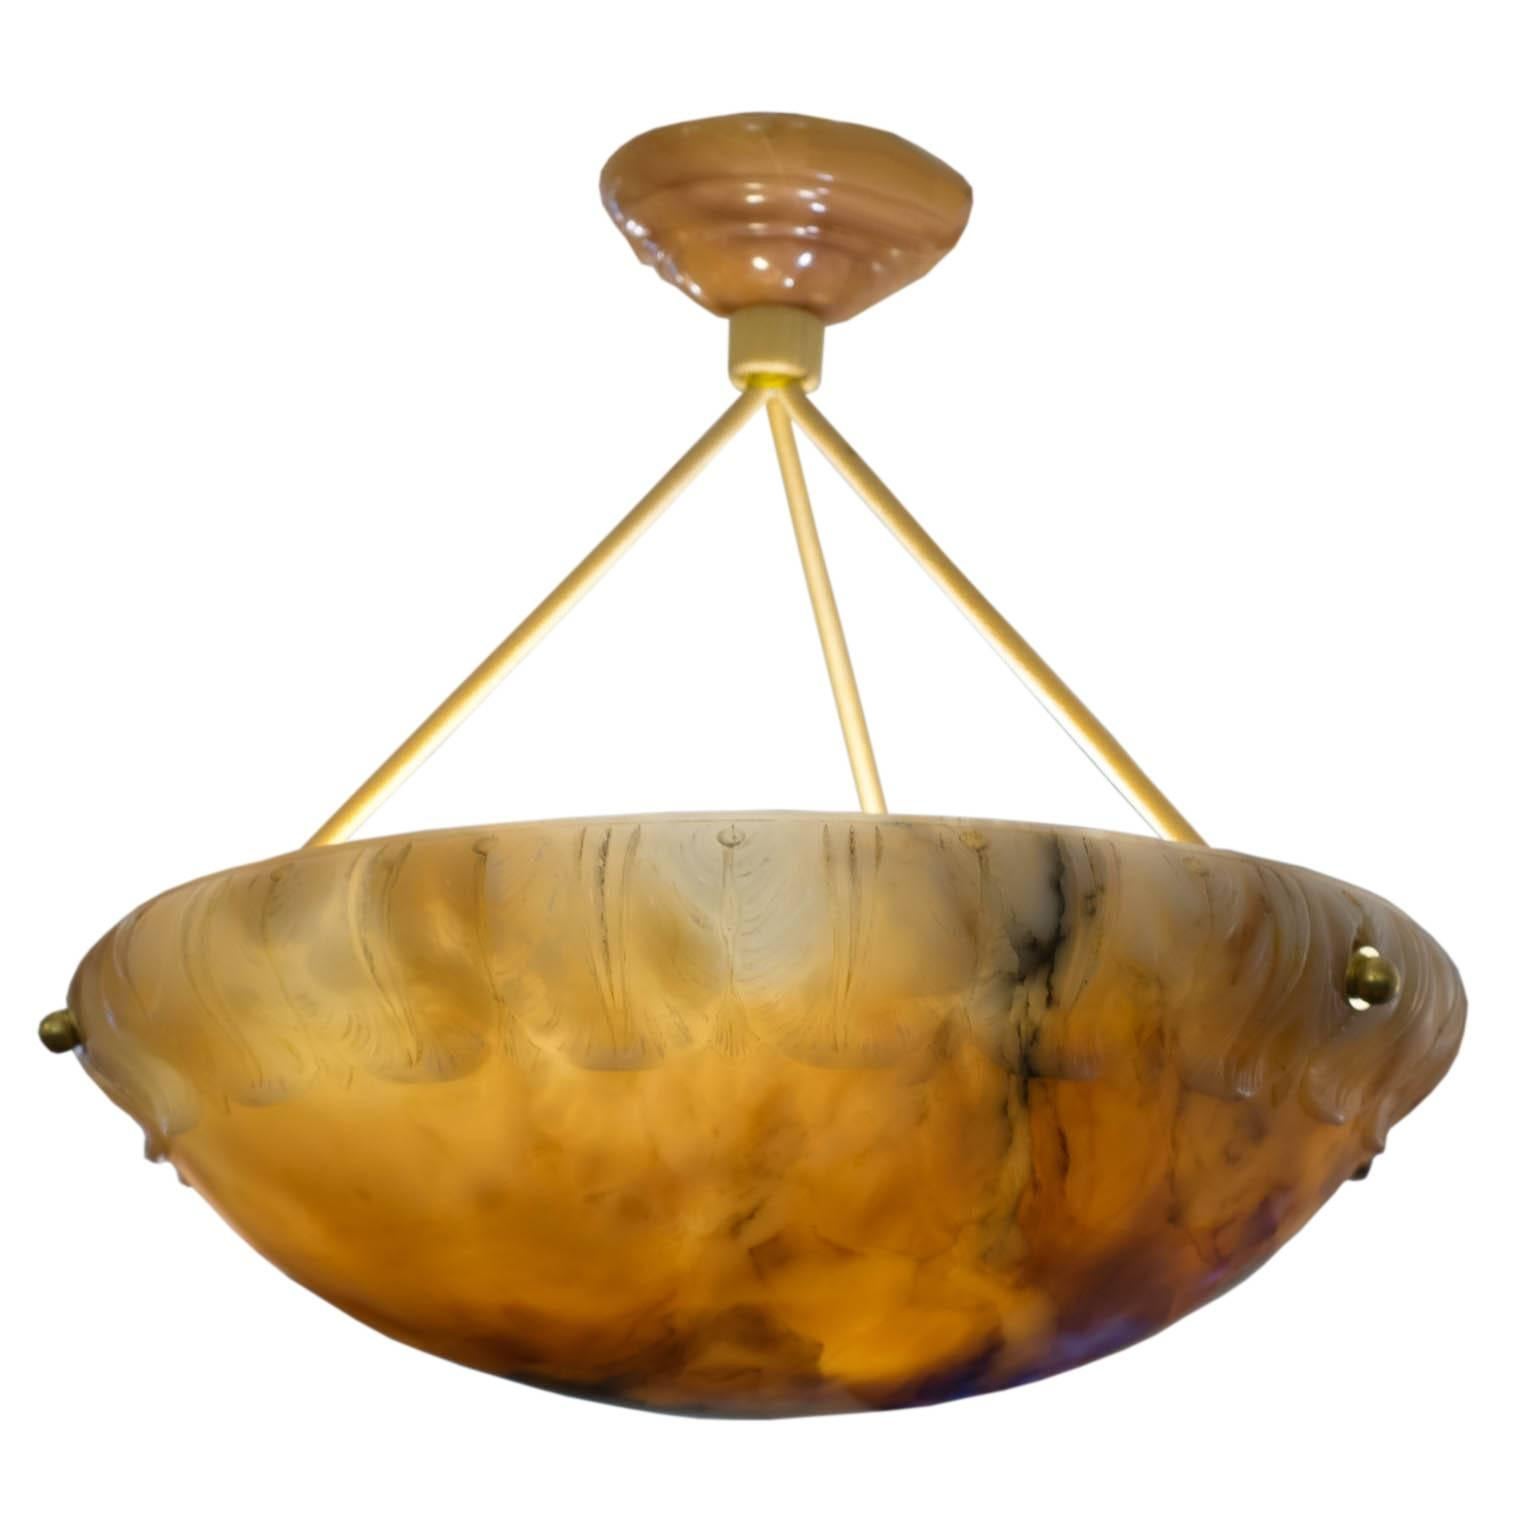 Visually exciting, this pendant was carved for a nineteenth century home being retrofitted for electricity. The mineral rich stone compliments the acanthus leaf motif adorning the upper edge. The fixture is suspended from a ceiling canopy of